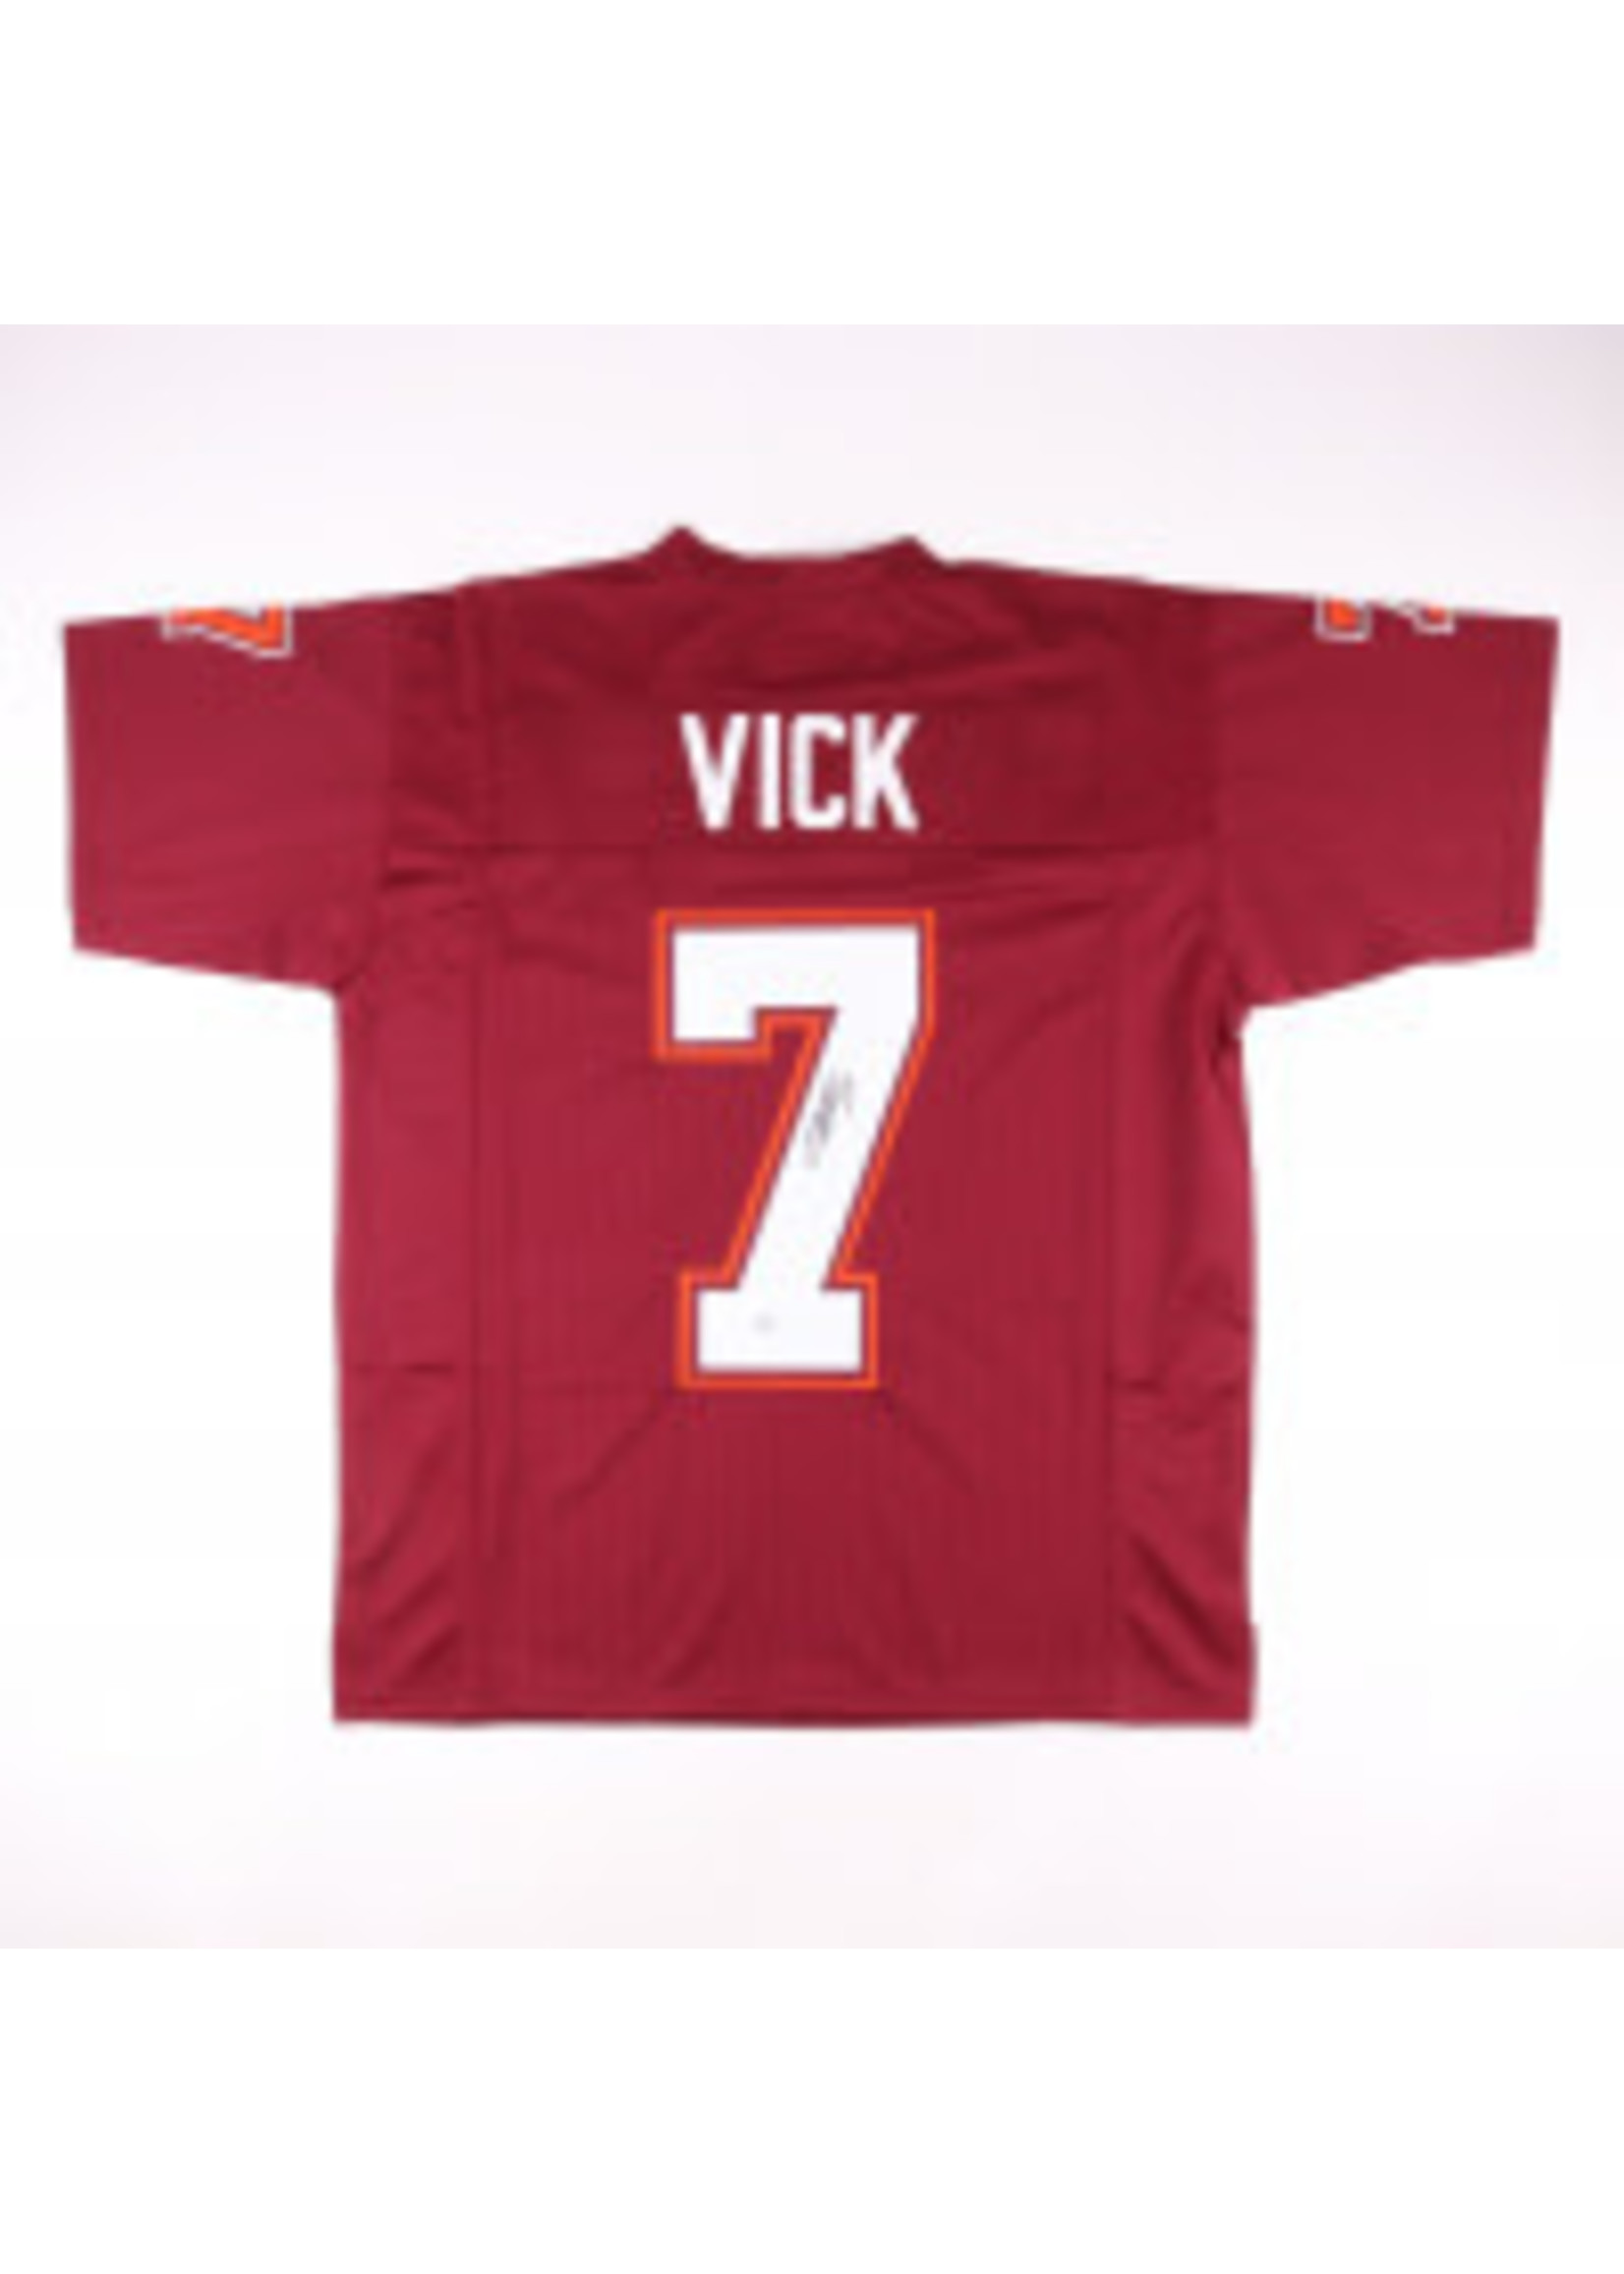 michael vick red jersey